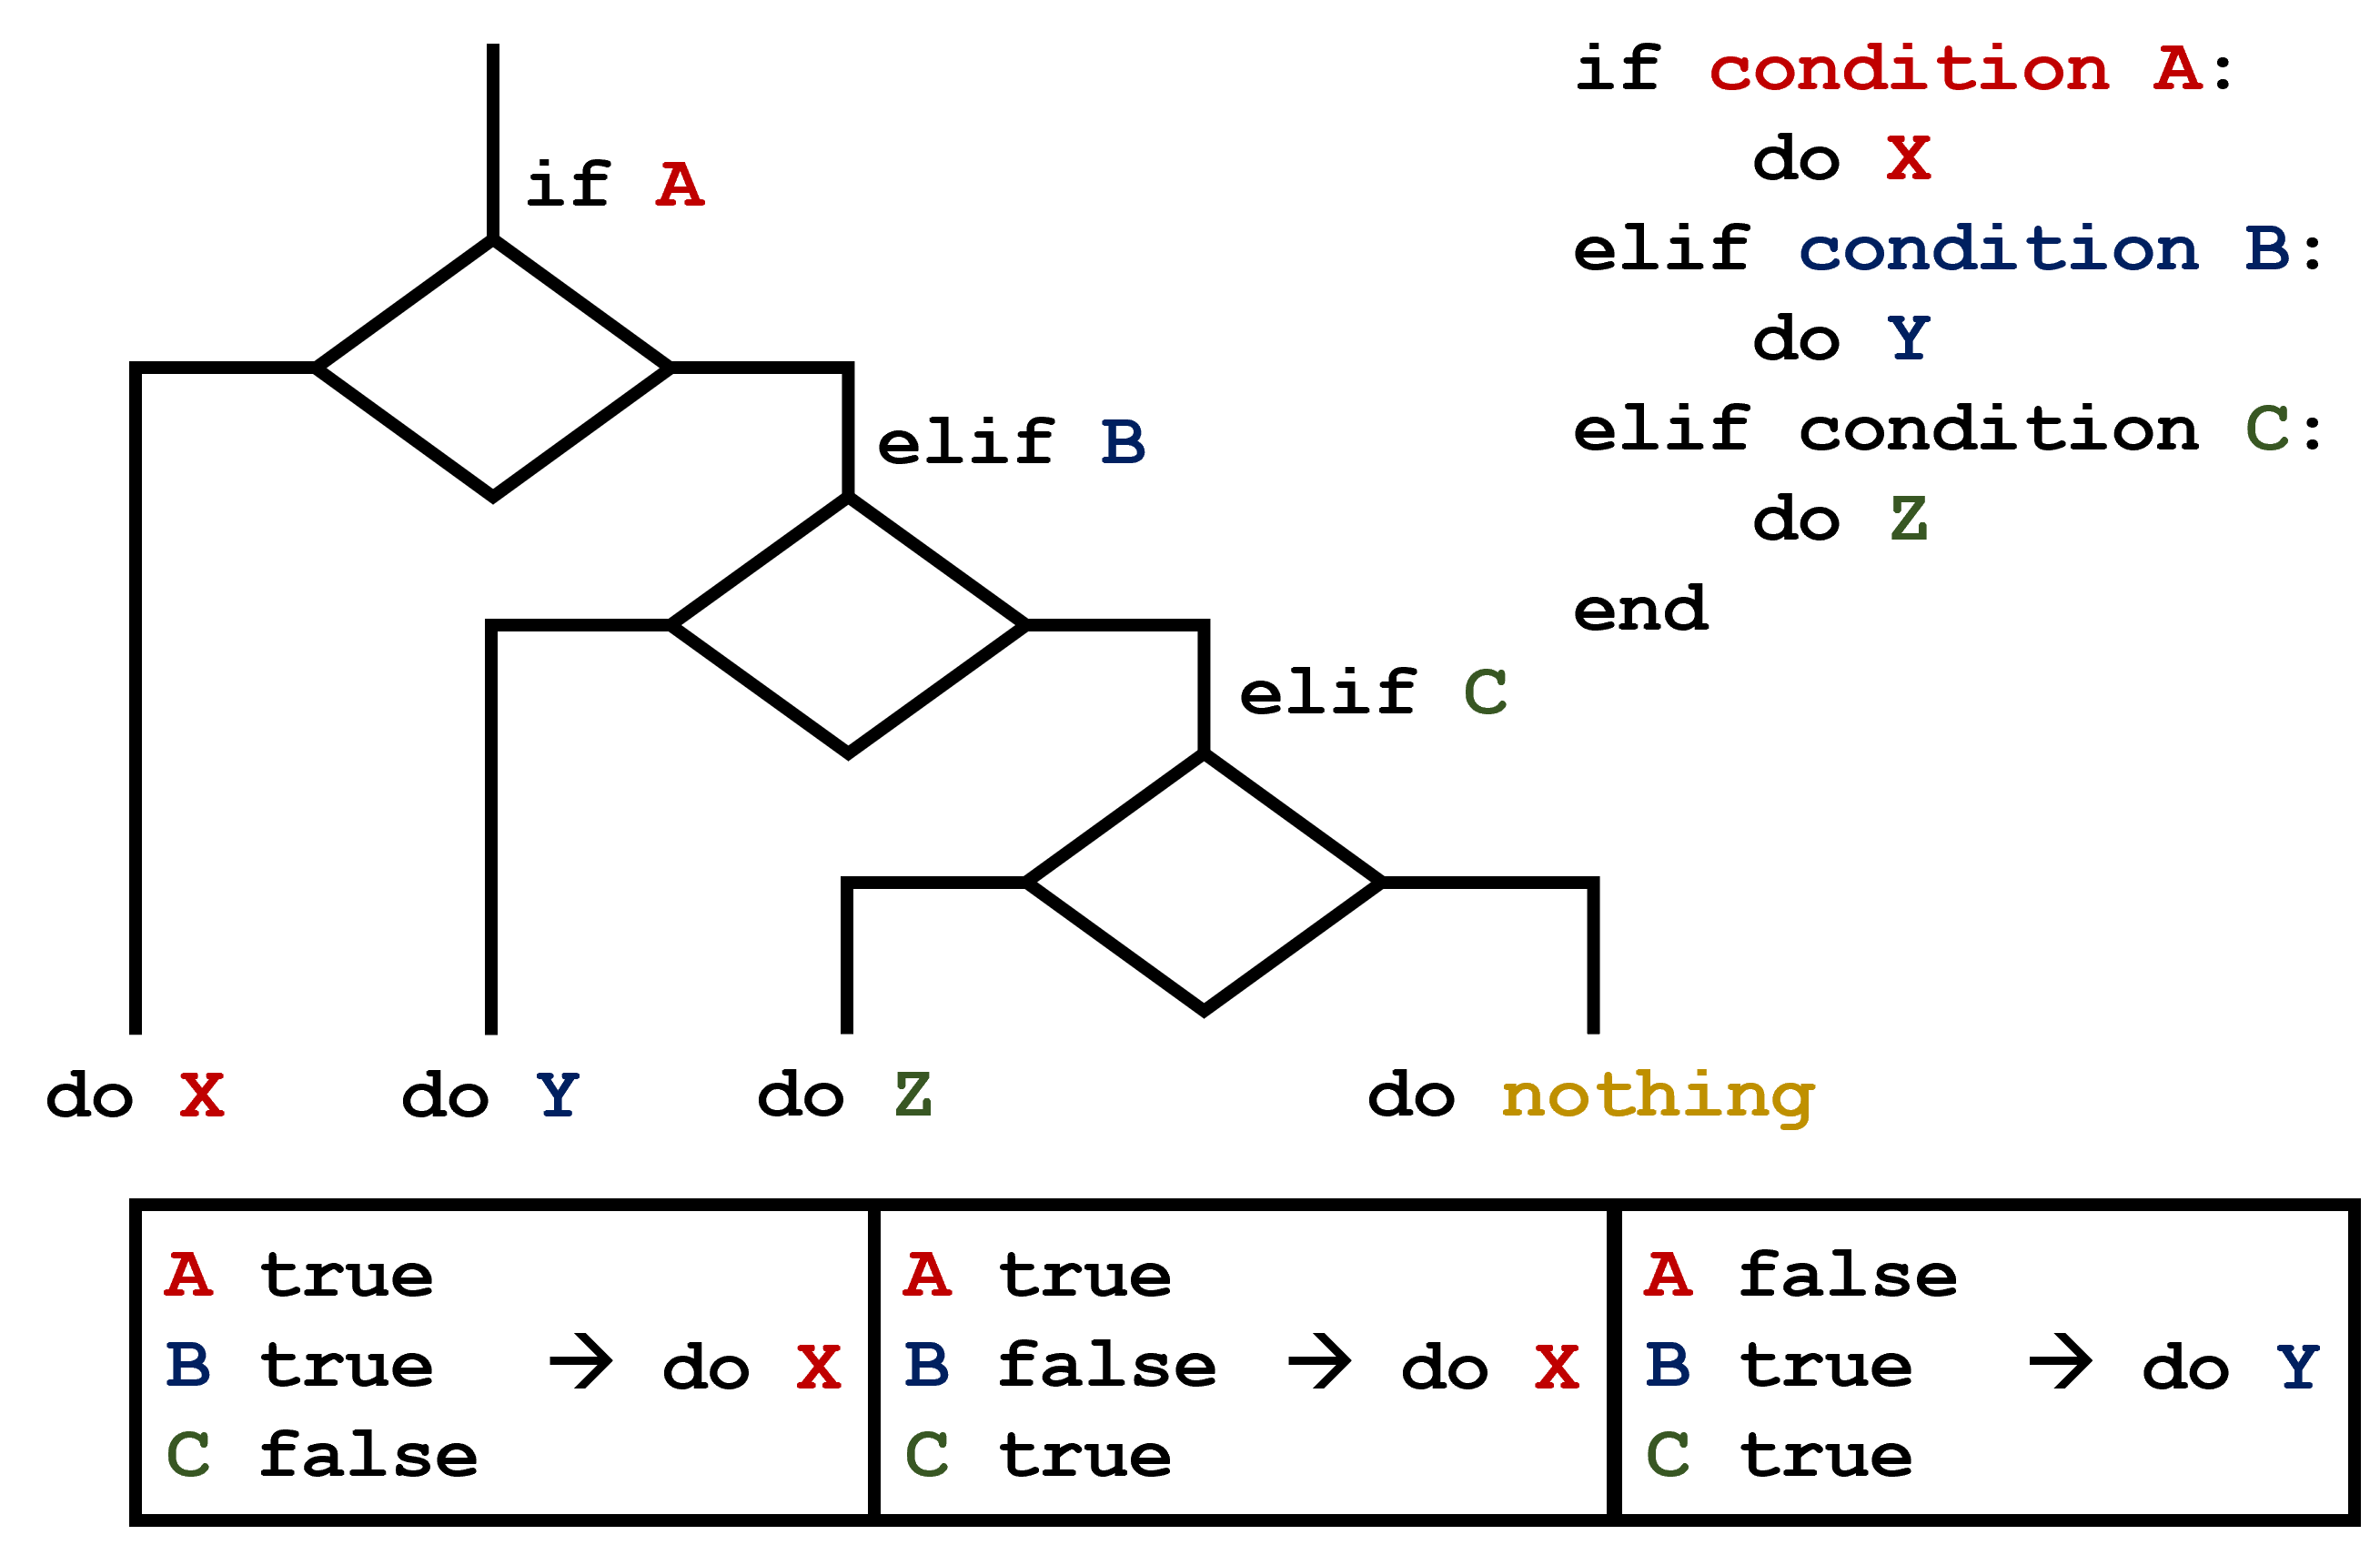 A flowchart diagram of a conditional section with multiple elif conditions and some possible outcomes.